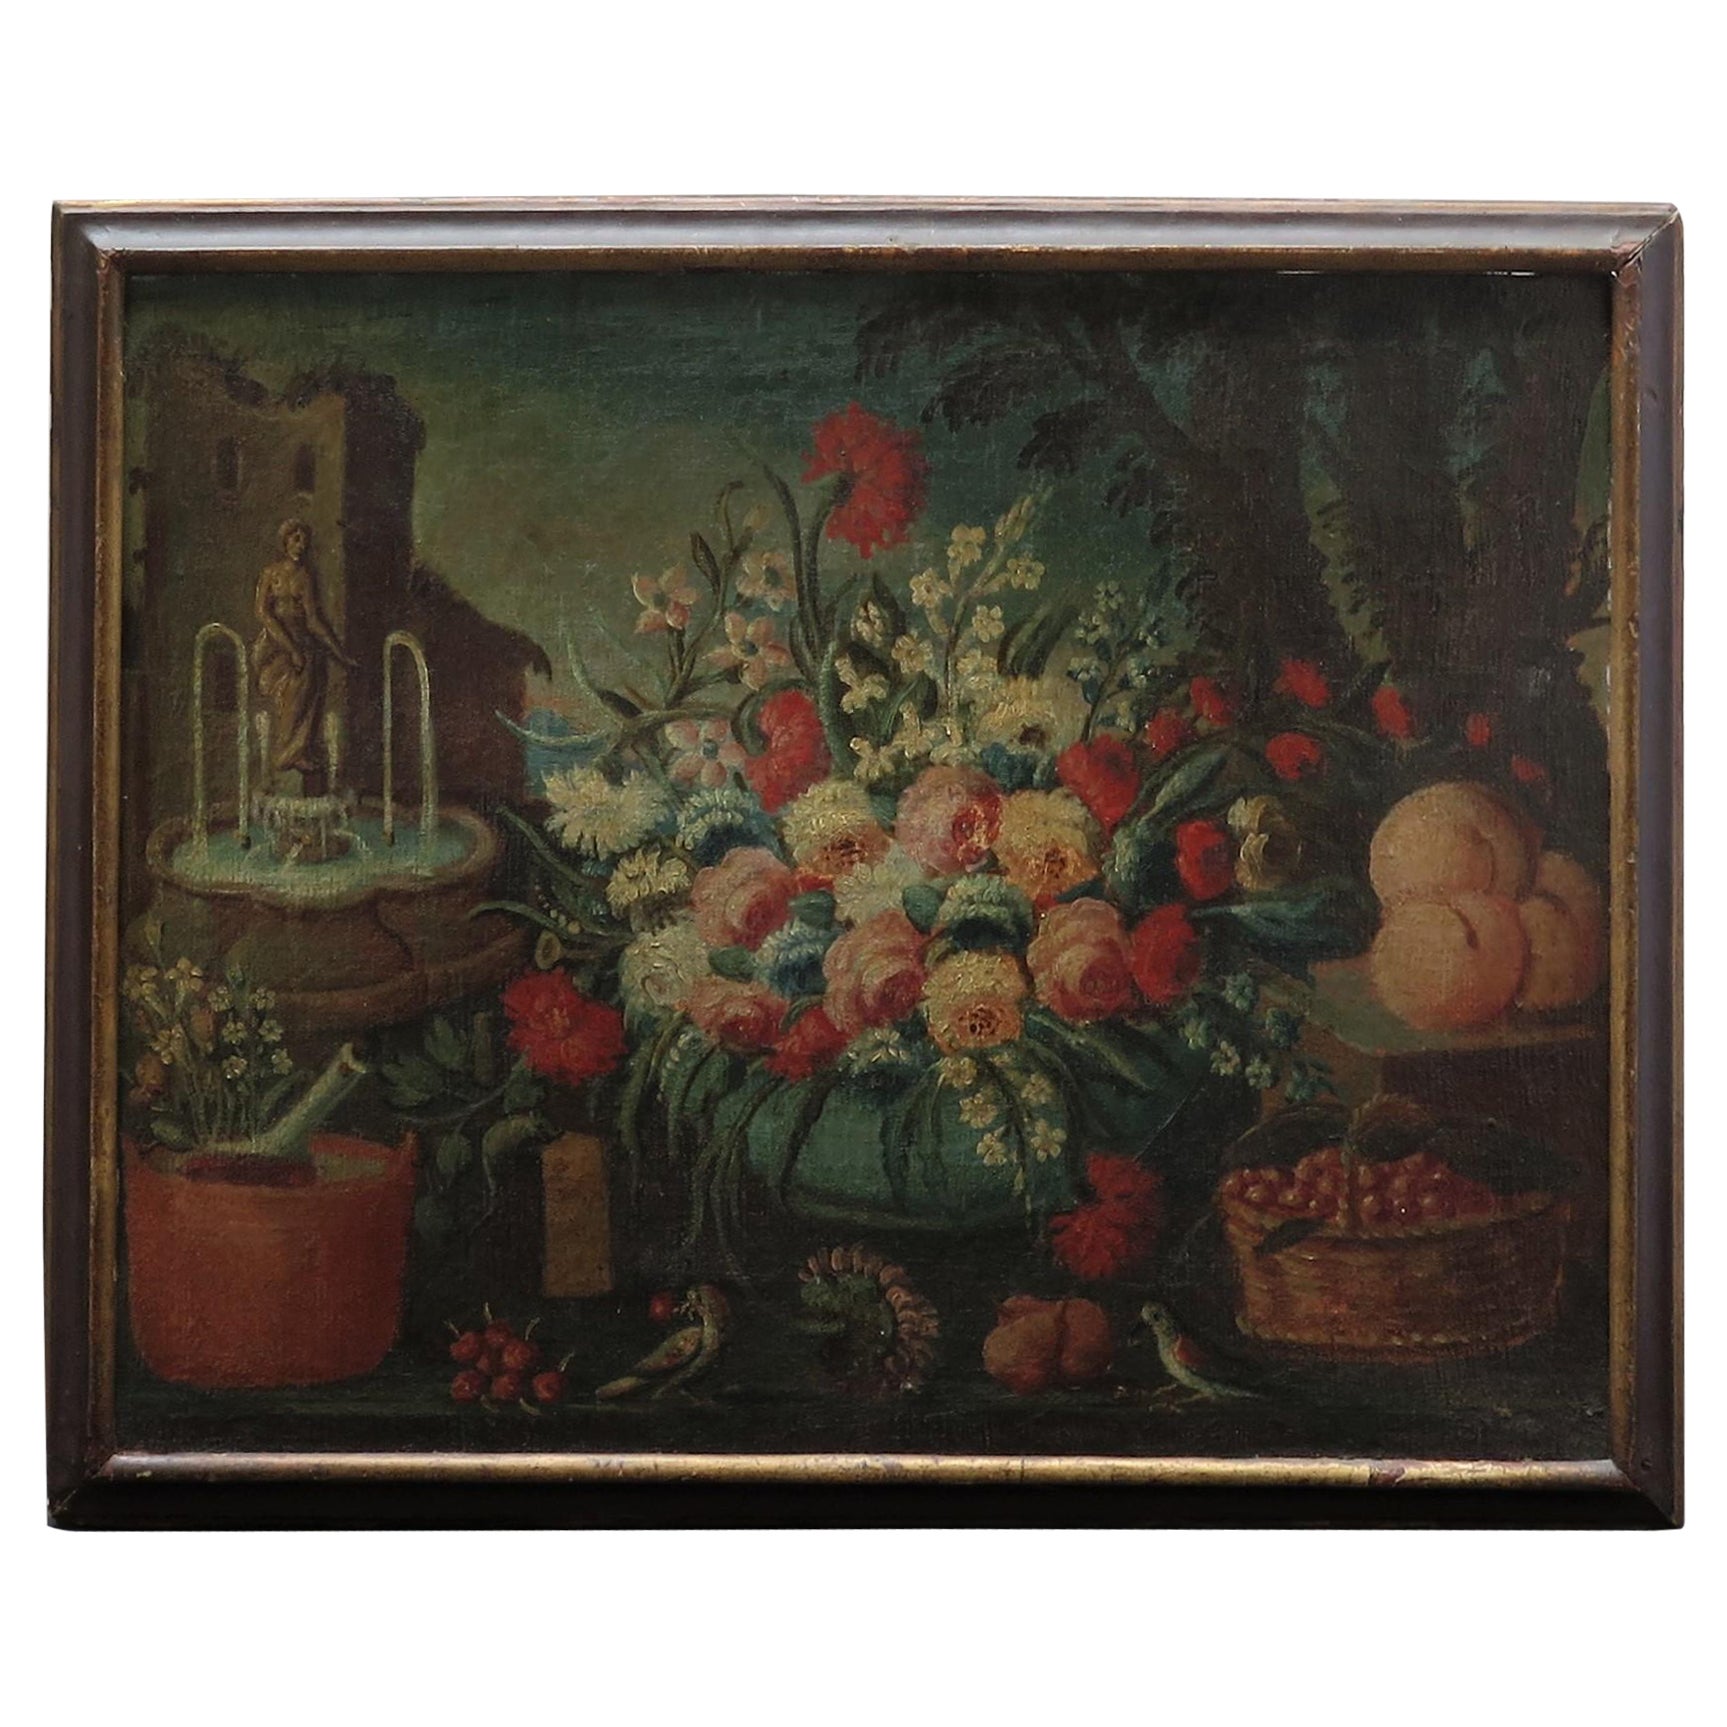 Oil on Canvas Painting of a Floral Arrangement